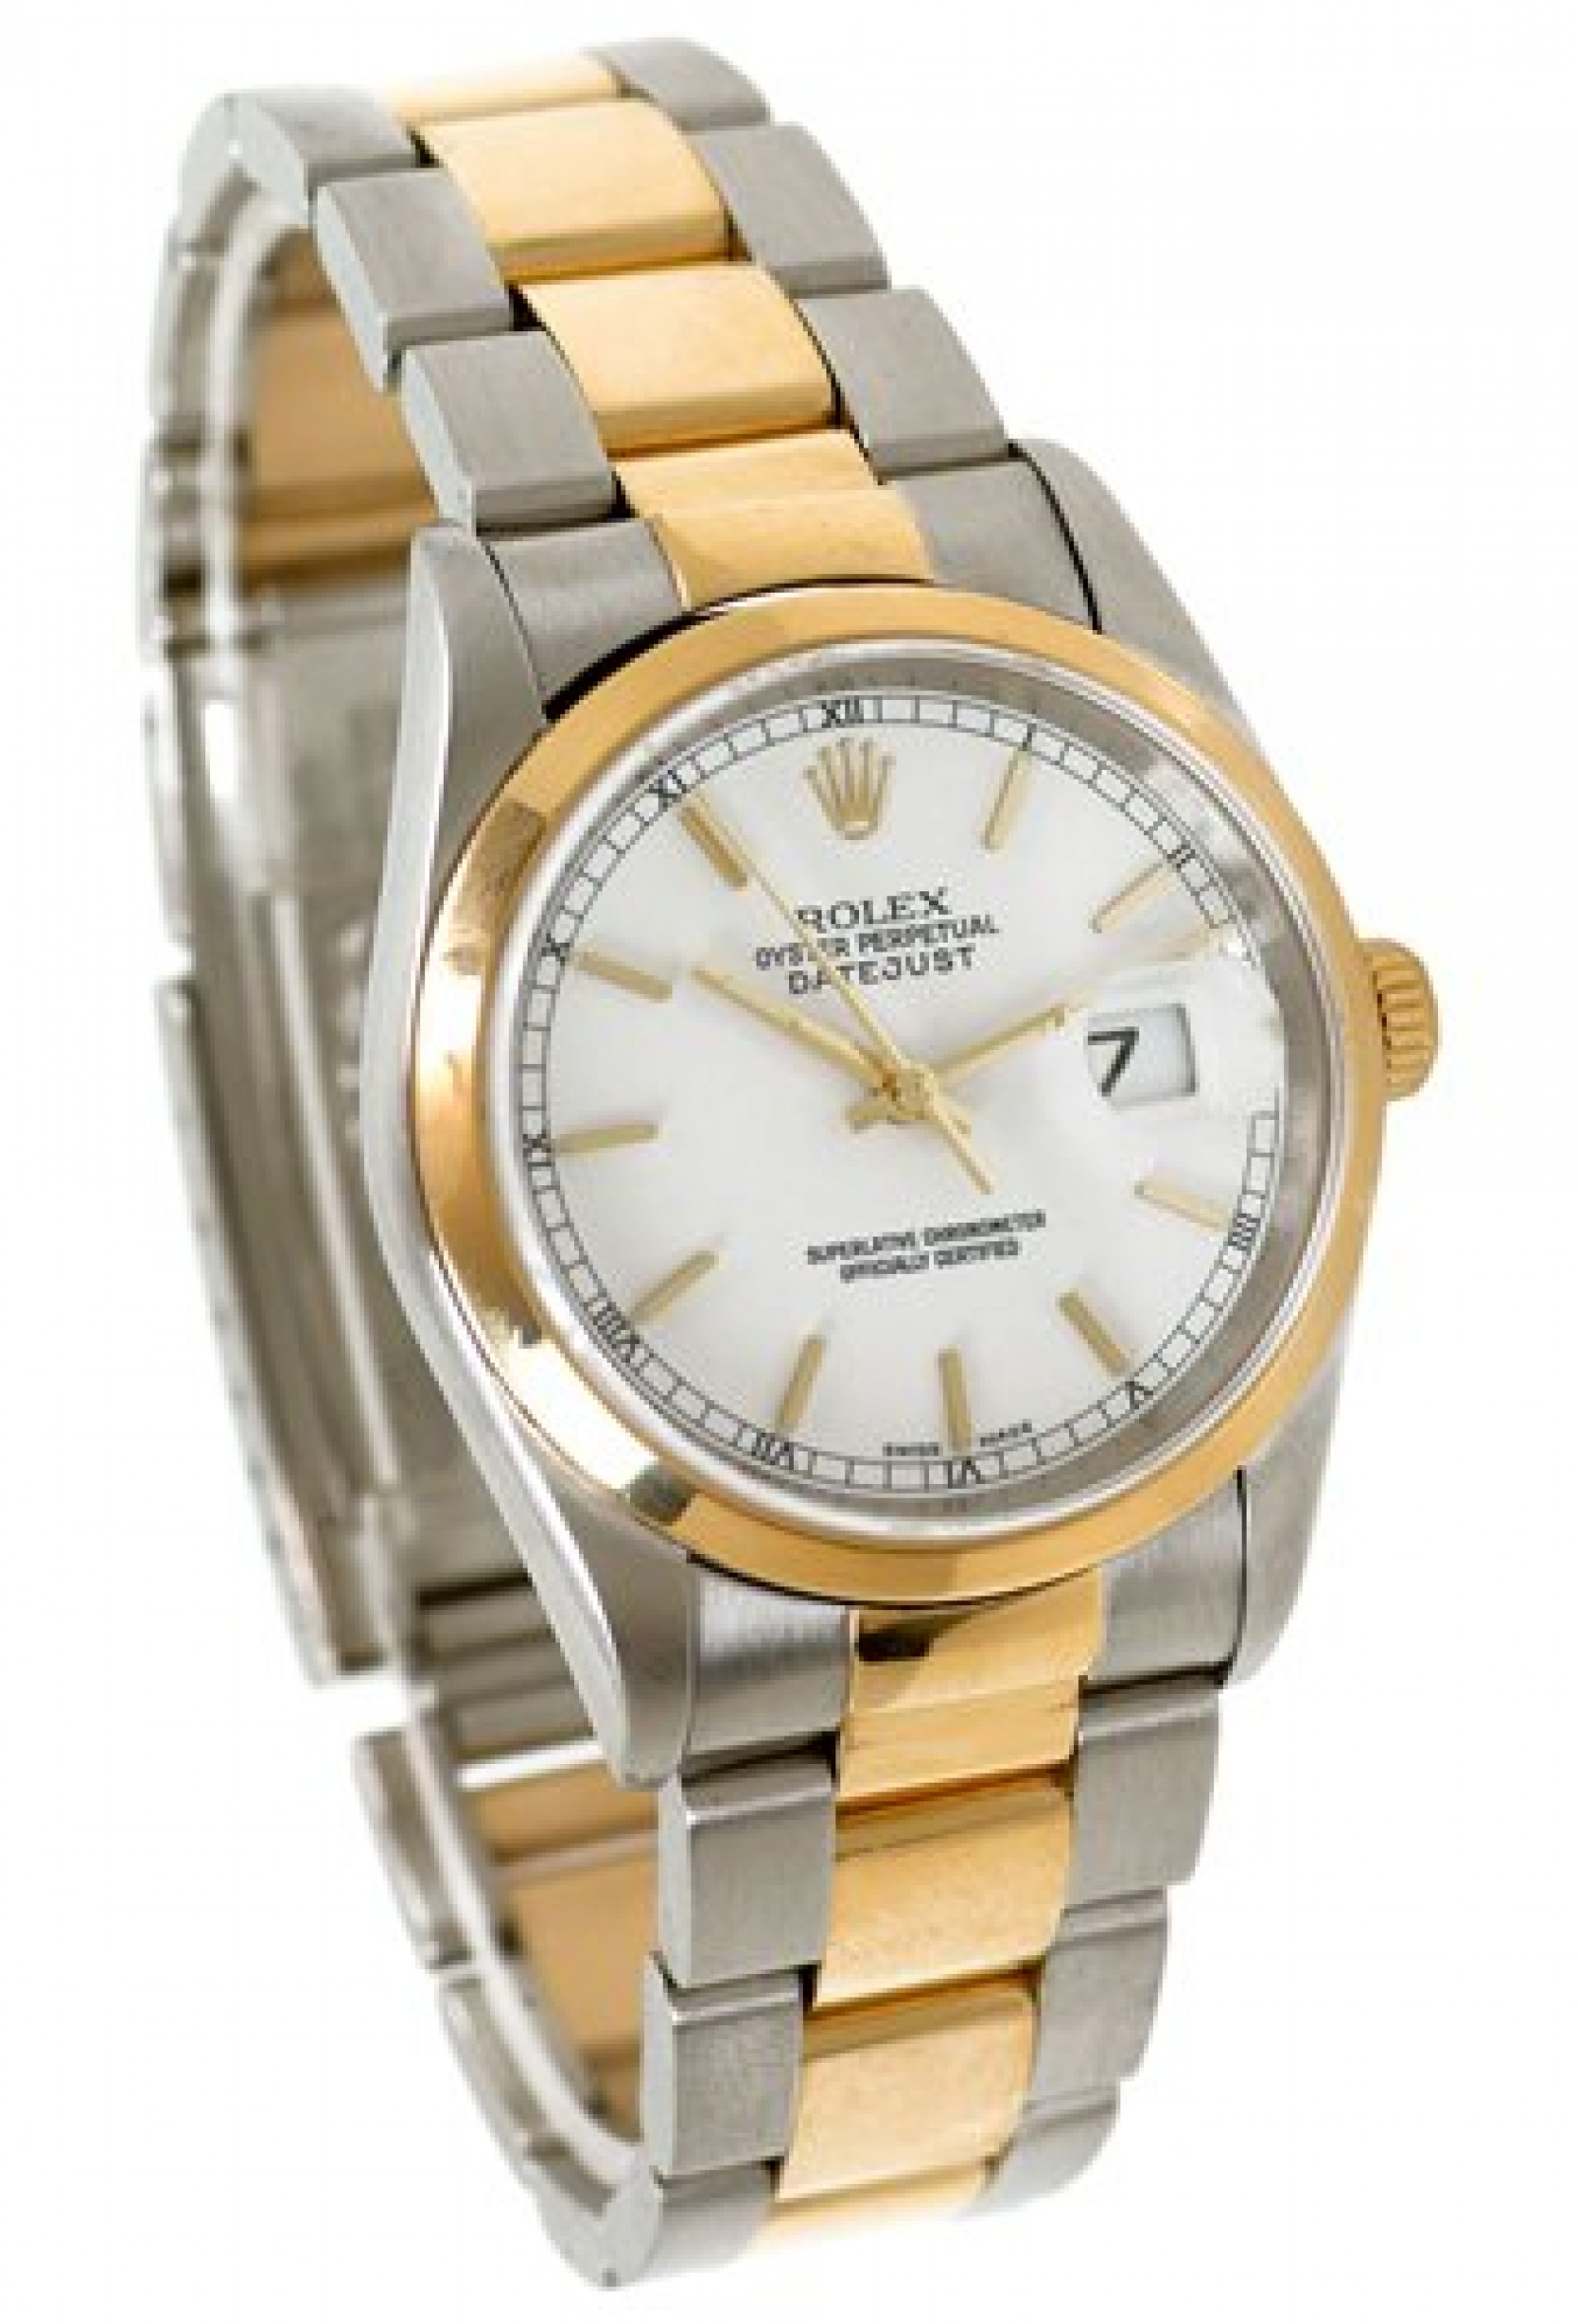 Rolex Prices for Datejust 16203